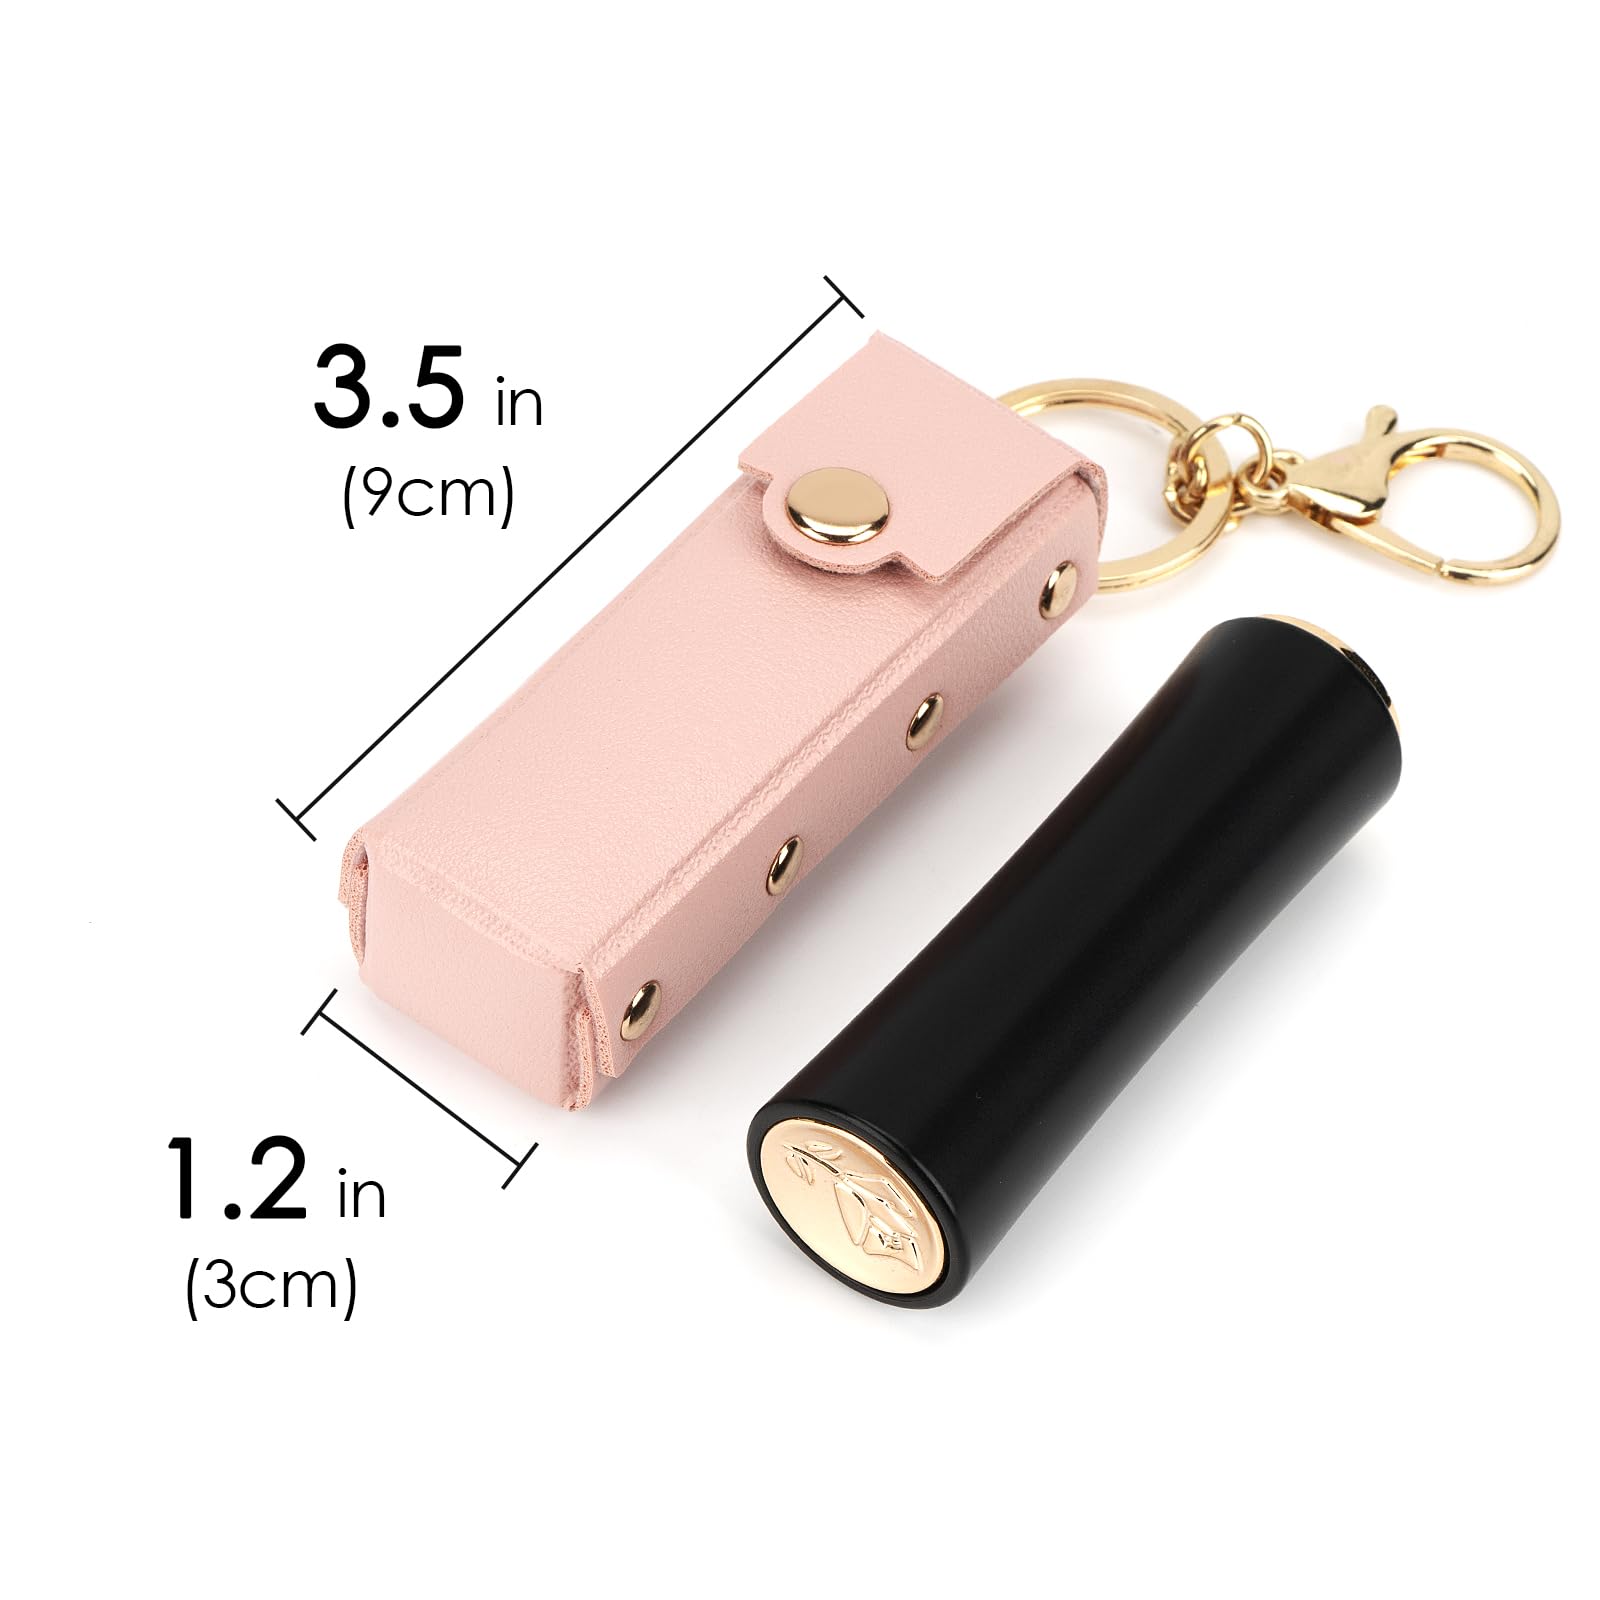 Adorila 2 Pack Lipstick Case Keychain, Soft Leather Chapstick Holder for Women, Potable Clip-on Sleeve Lipstick Pouch (Green & Pink)